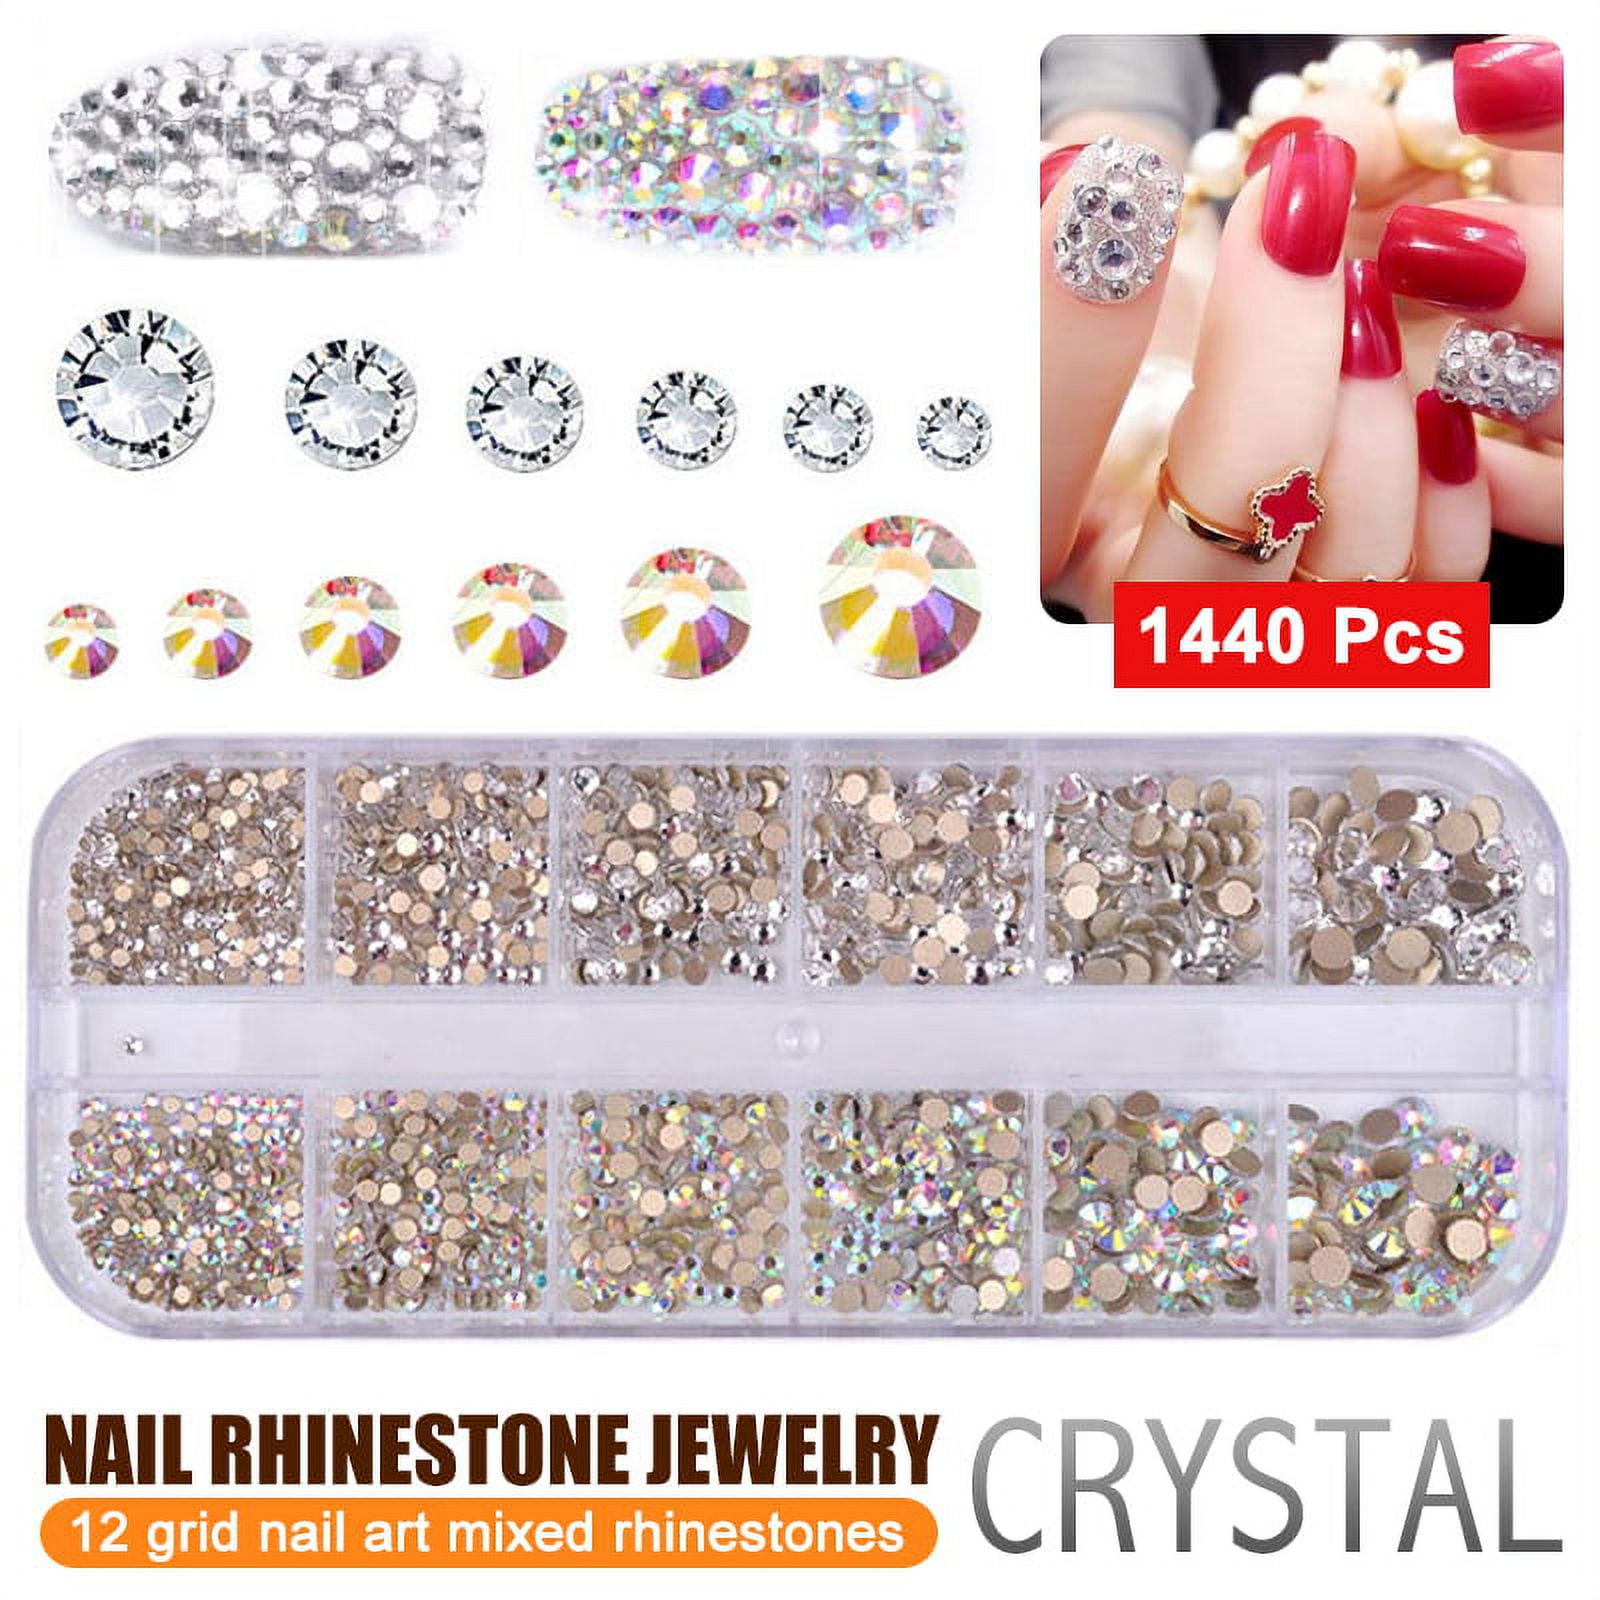 Lnkoo 1440 Pieces Rhinestone Clear AB Black and Red Flatback Crystals 6 Sizes 12 Colored Iron on Rhinestones Glass Stones in Storage Box for Nails